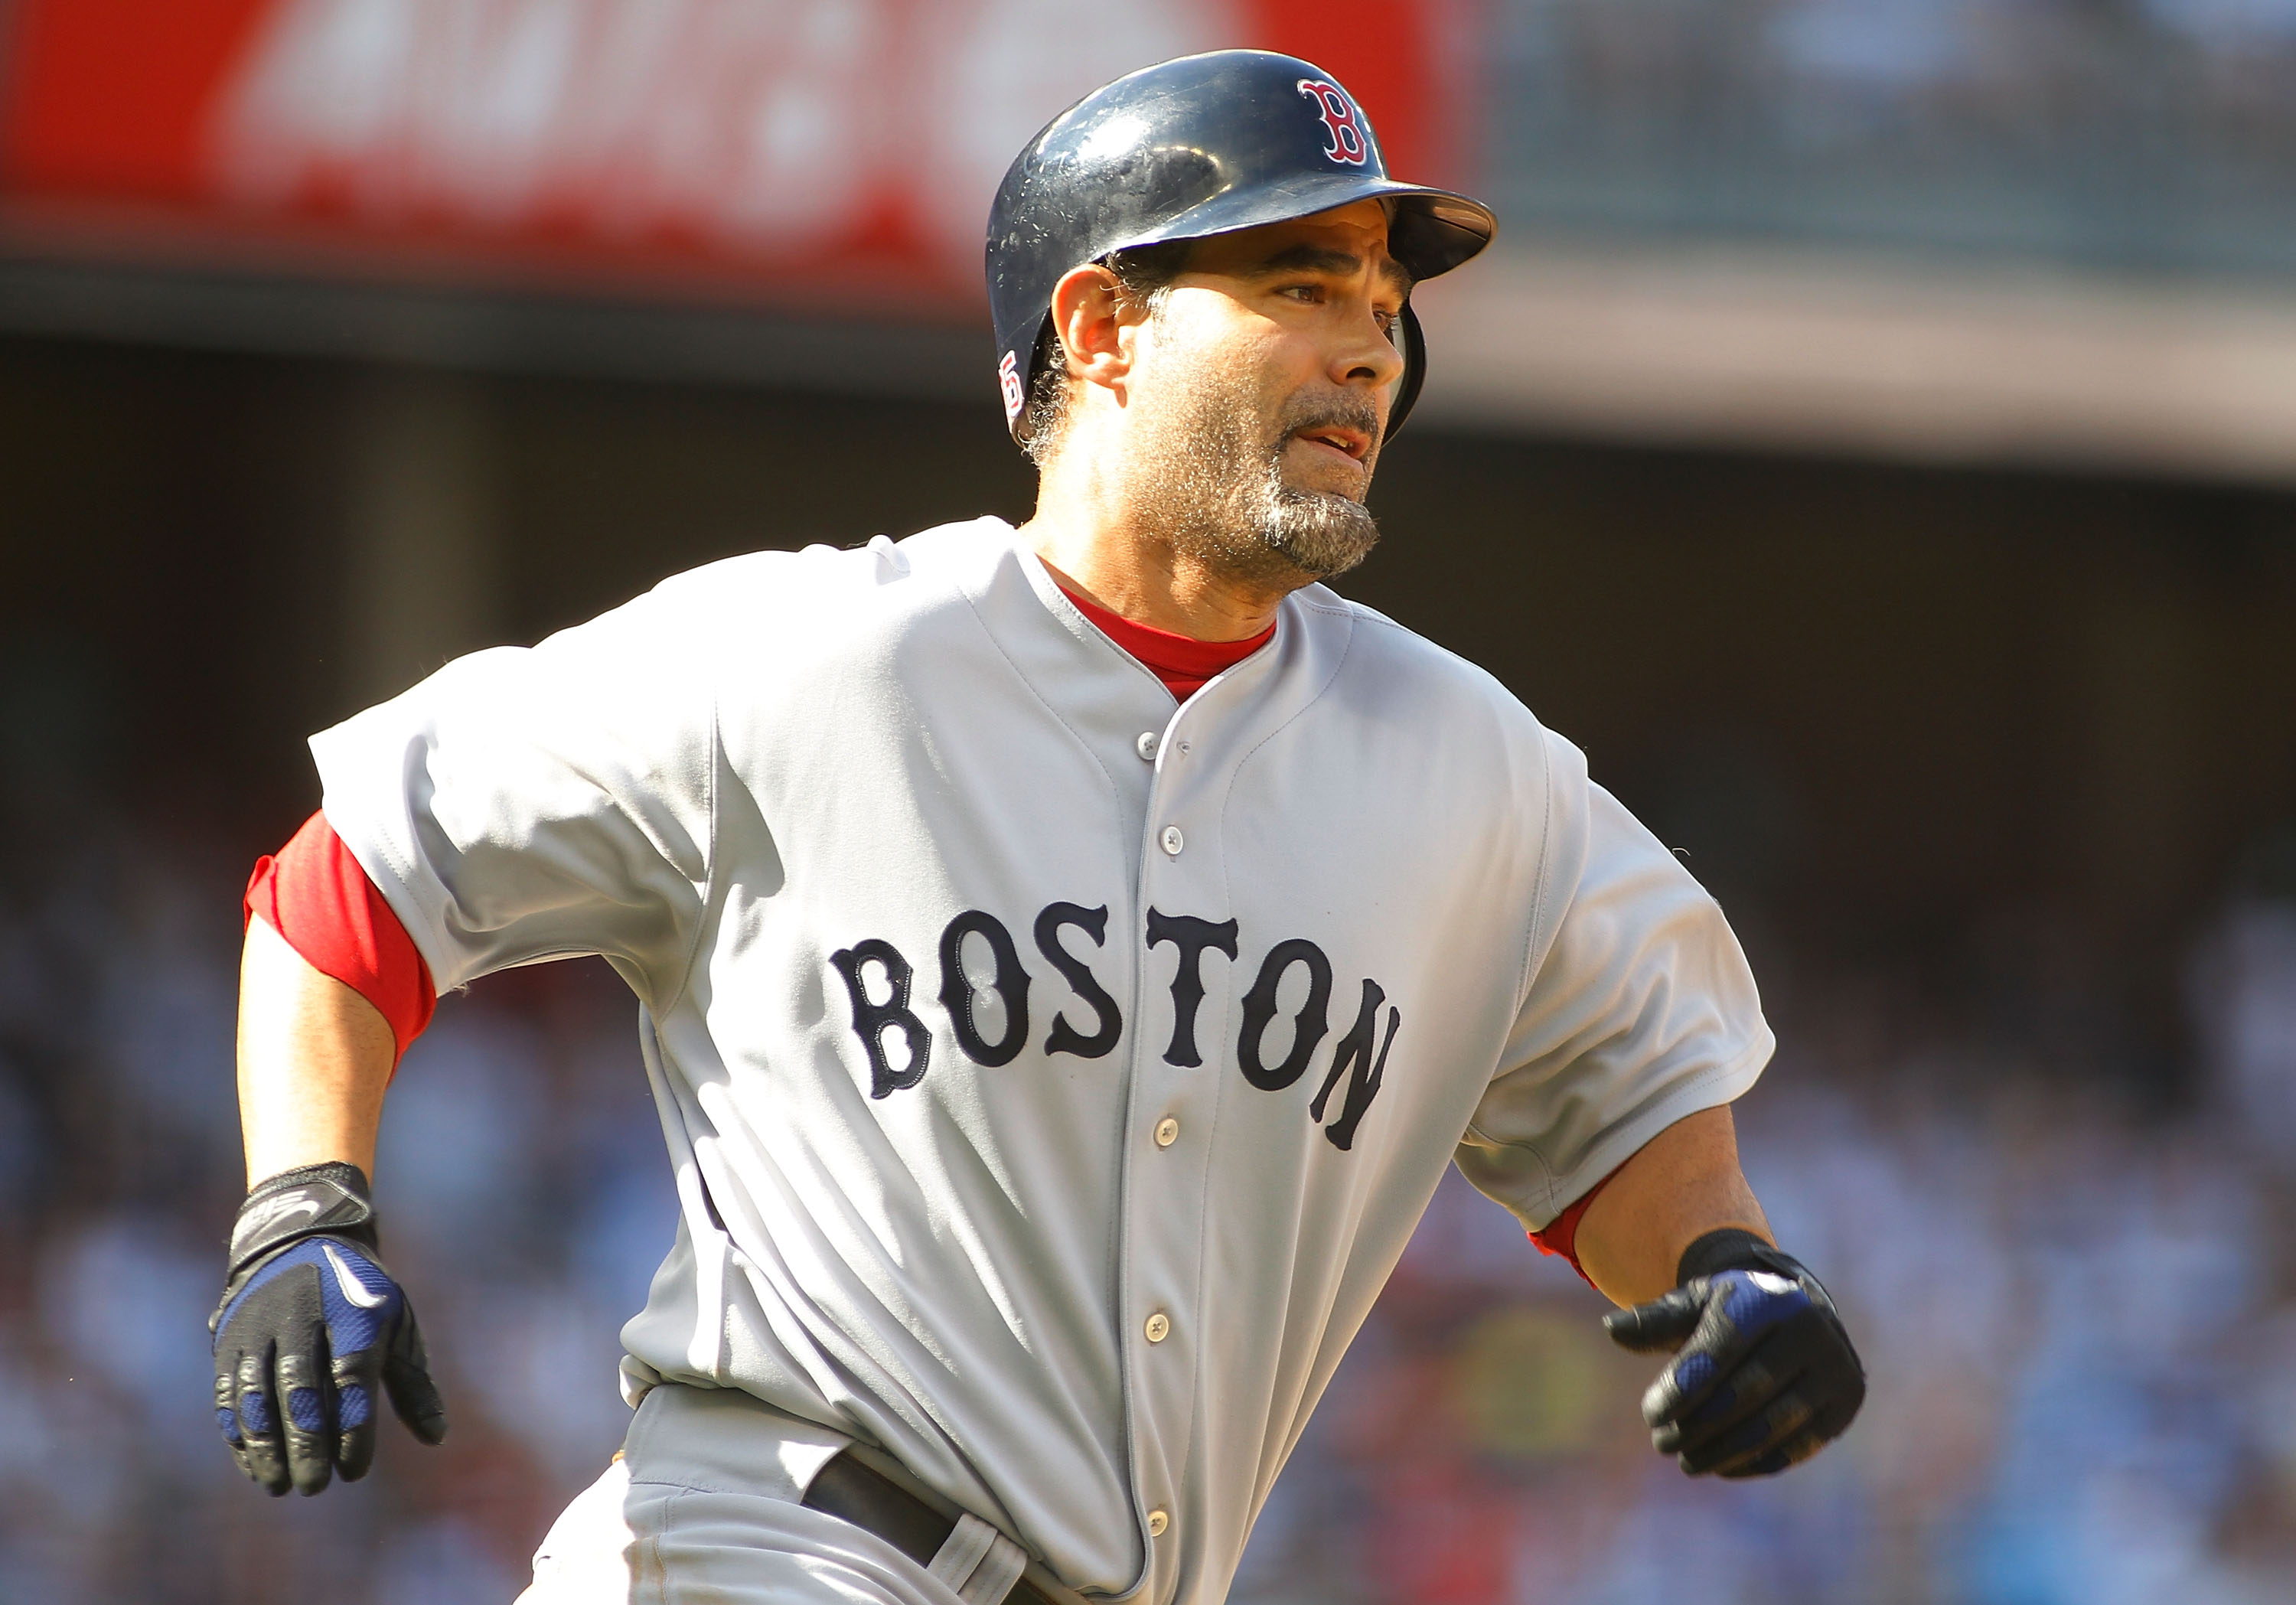 NEW YORK - AUGUST 07:  Mike Lowell #25 of the Boston Red Sox hits an RBI double in the second-inning against the New York Yankees on August 7, 2010 at Yankee Stadium in the Bronx borough of New York City.  (Photo by Mike Stobe/Getty Images)